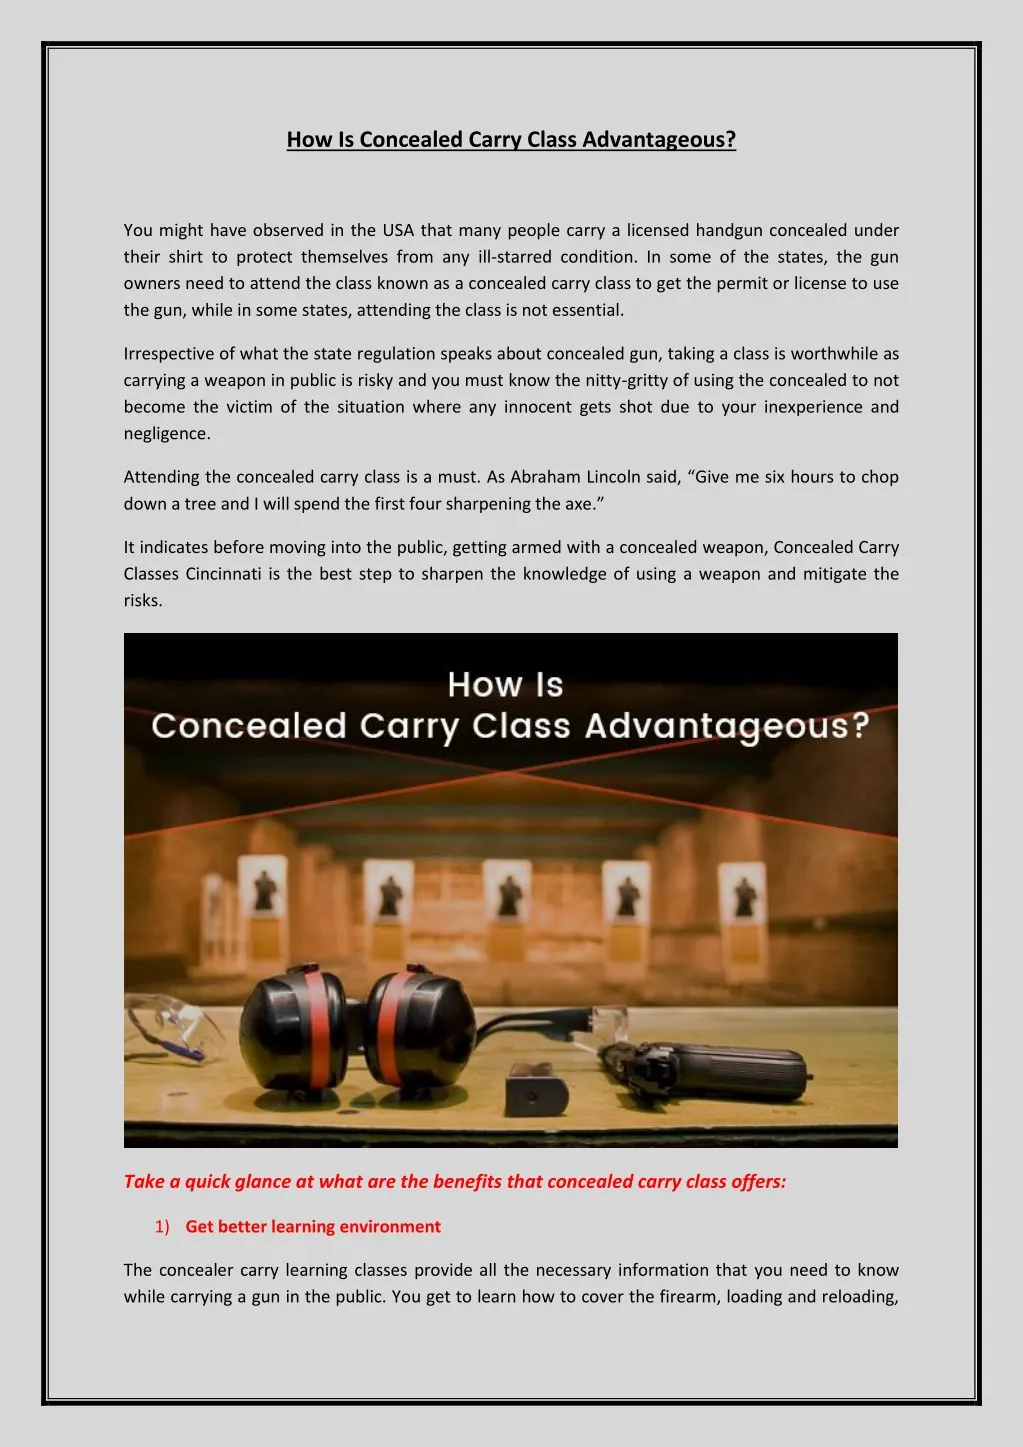 how is concealed carry class advantageous